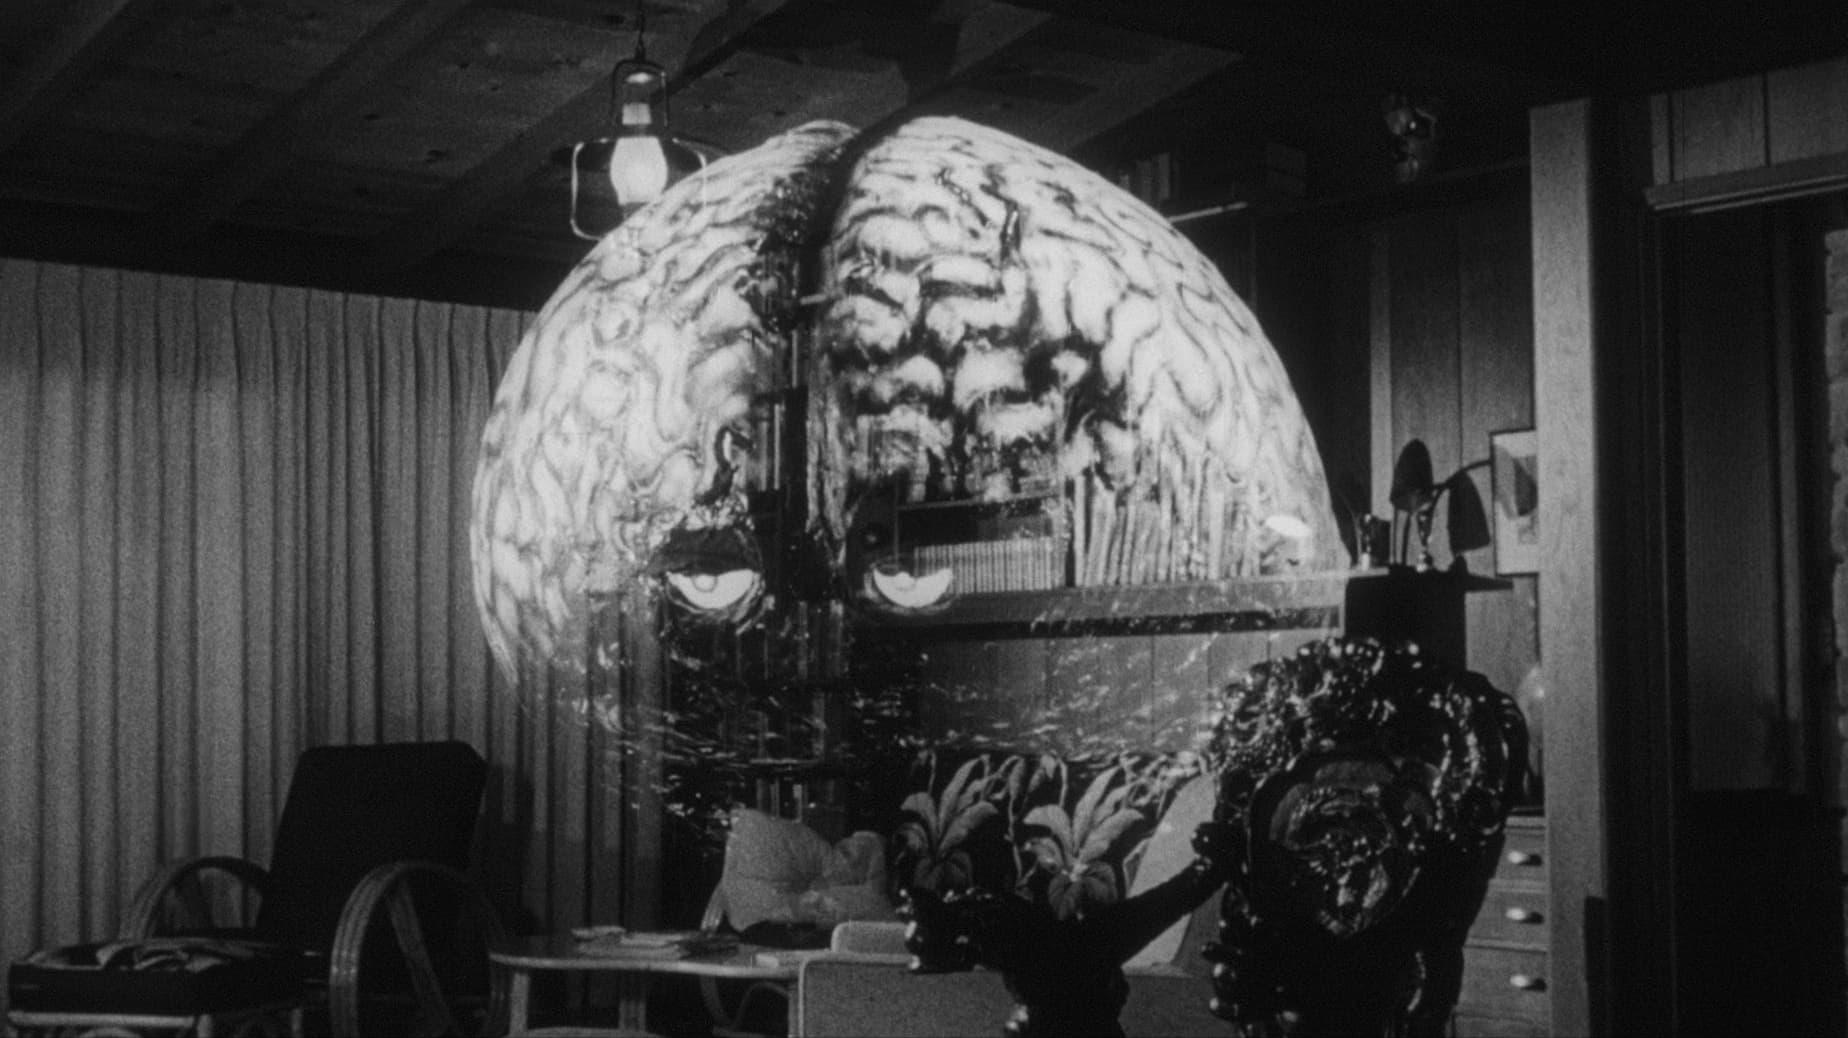 The Brain from Planet Arous backdrop